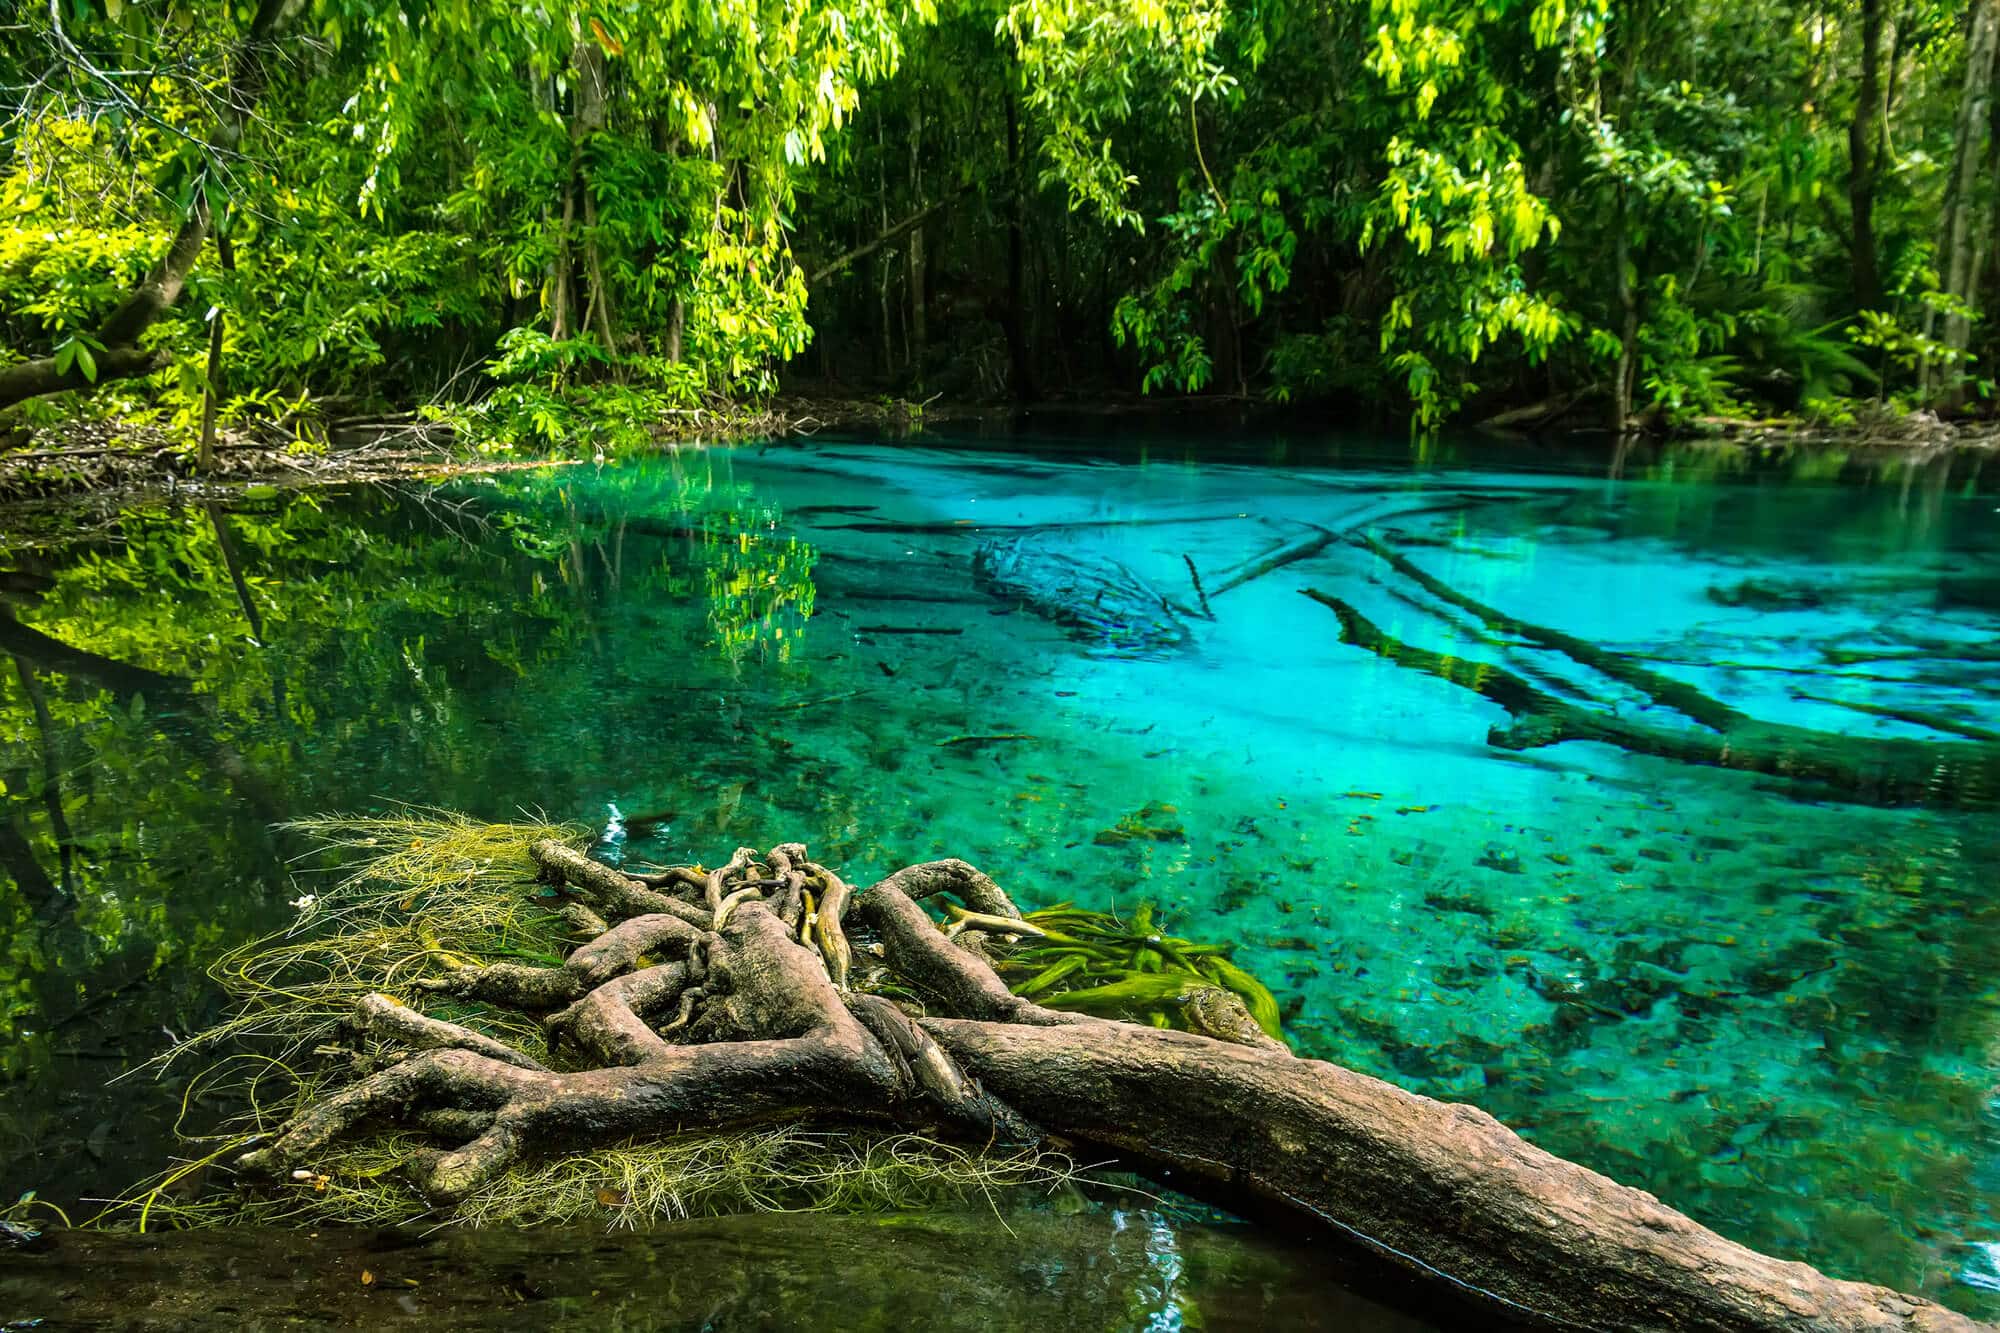 Best guided tours Krabi Thailand - View of the crystal clear emerald pool with mangrove roots and lush greenery.